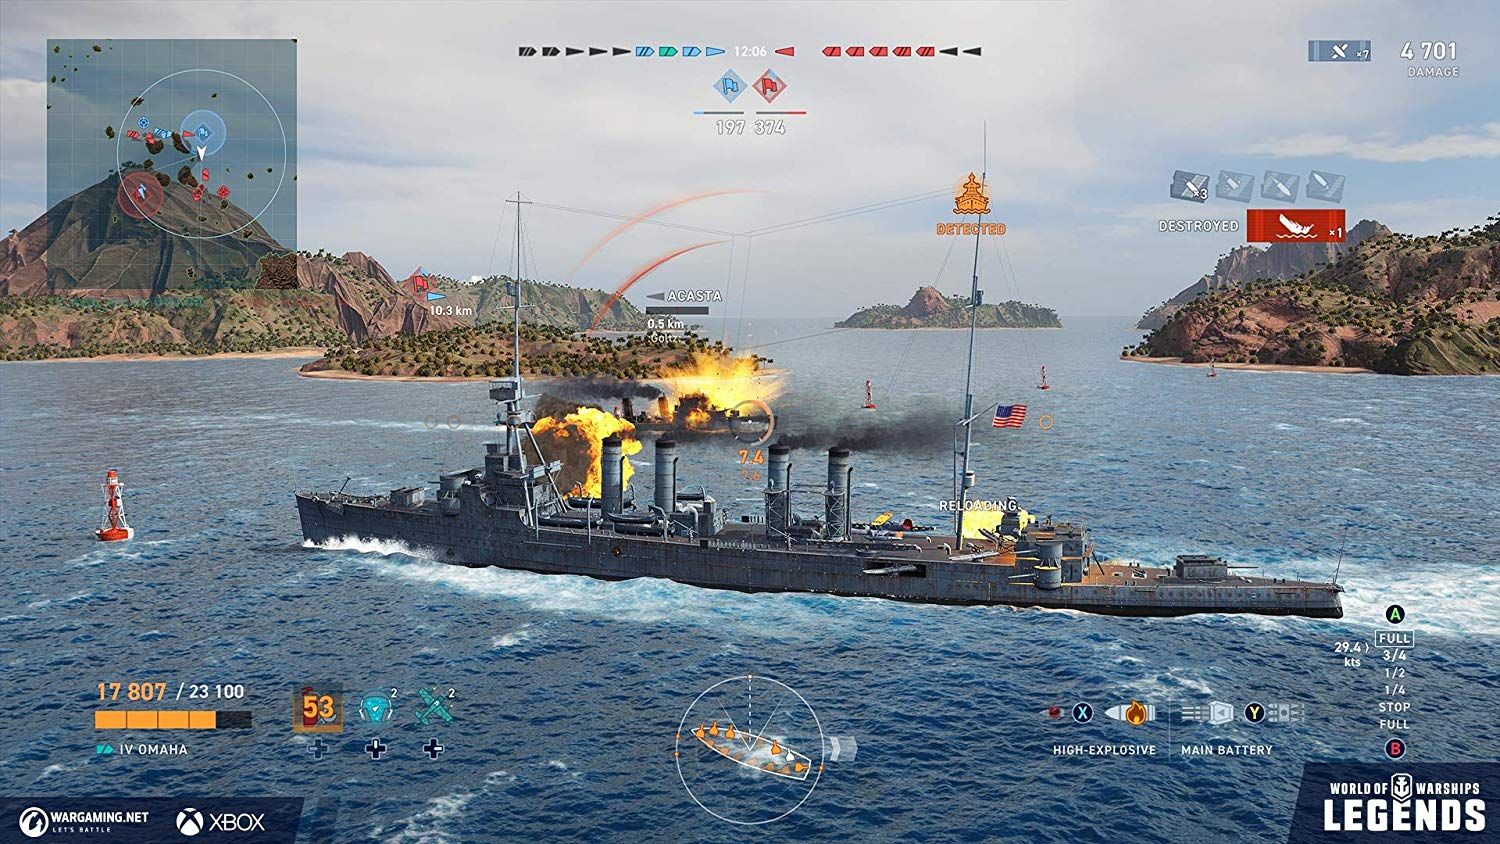 World of Warships Legends gameplay